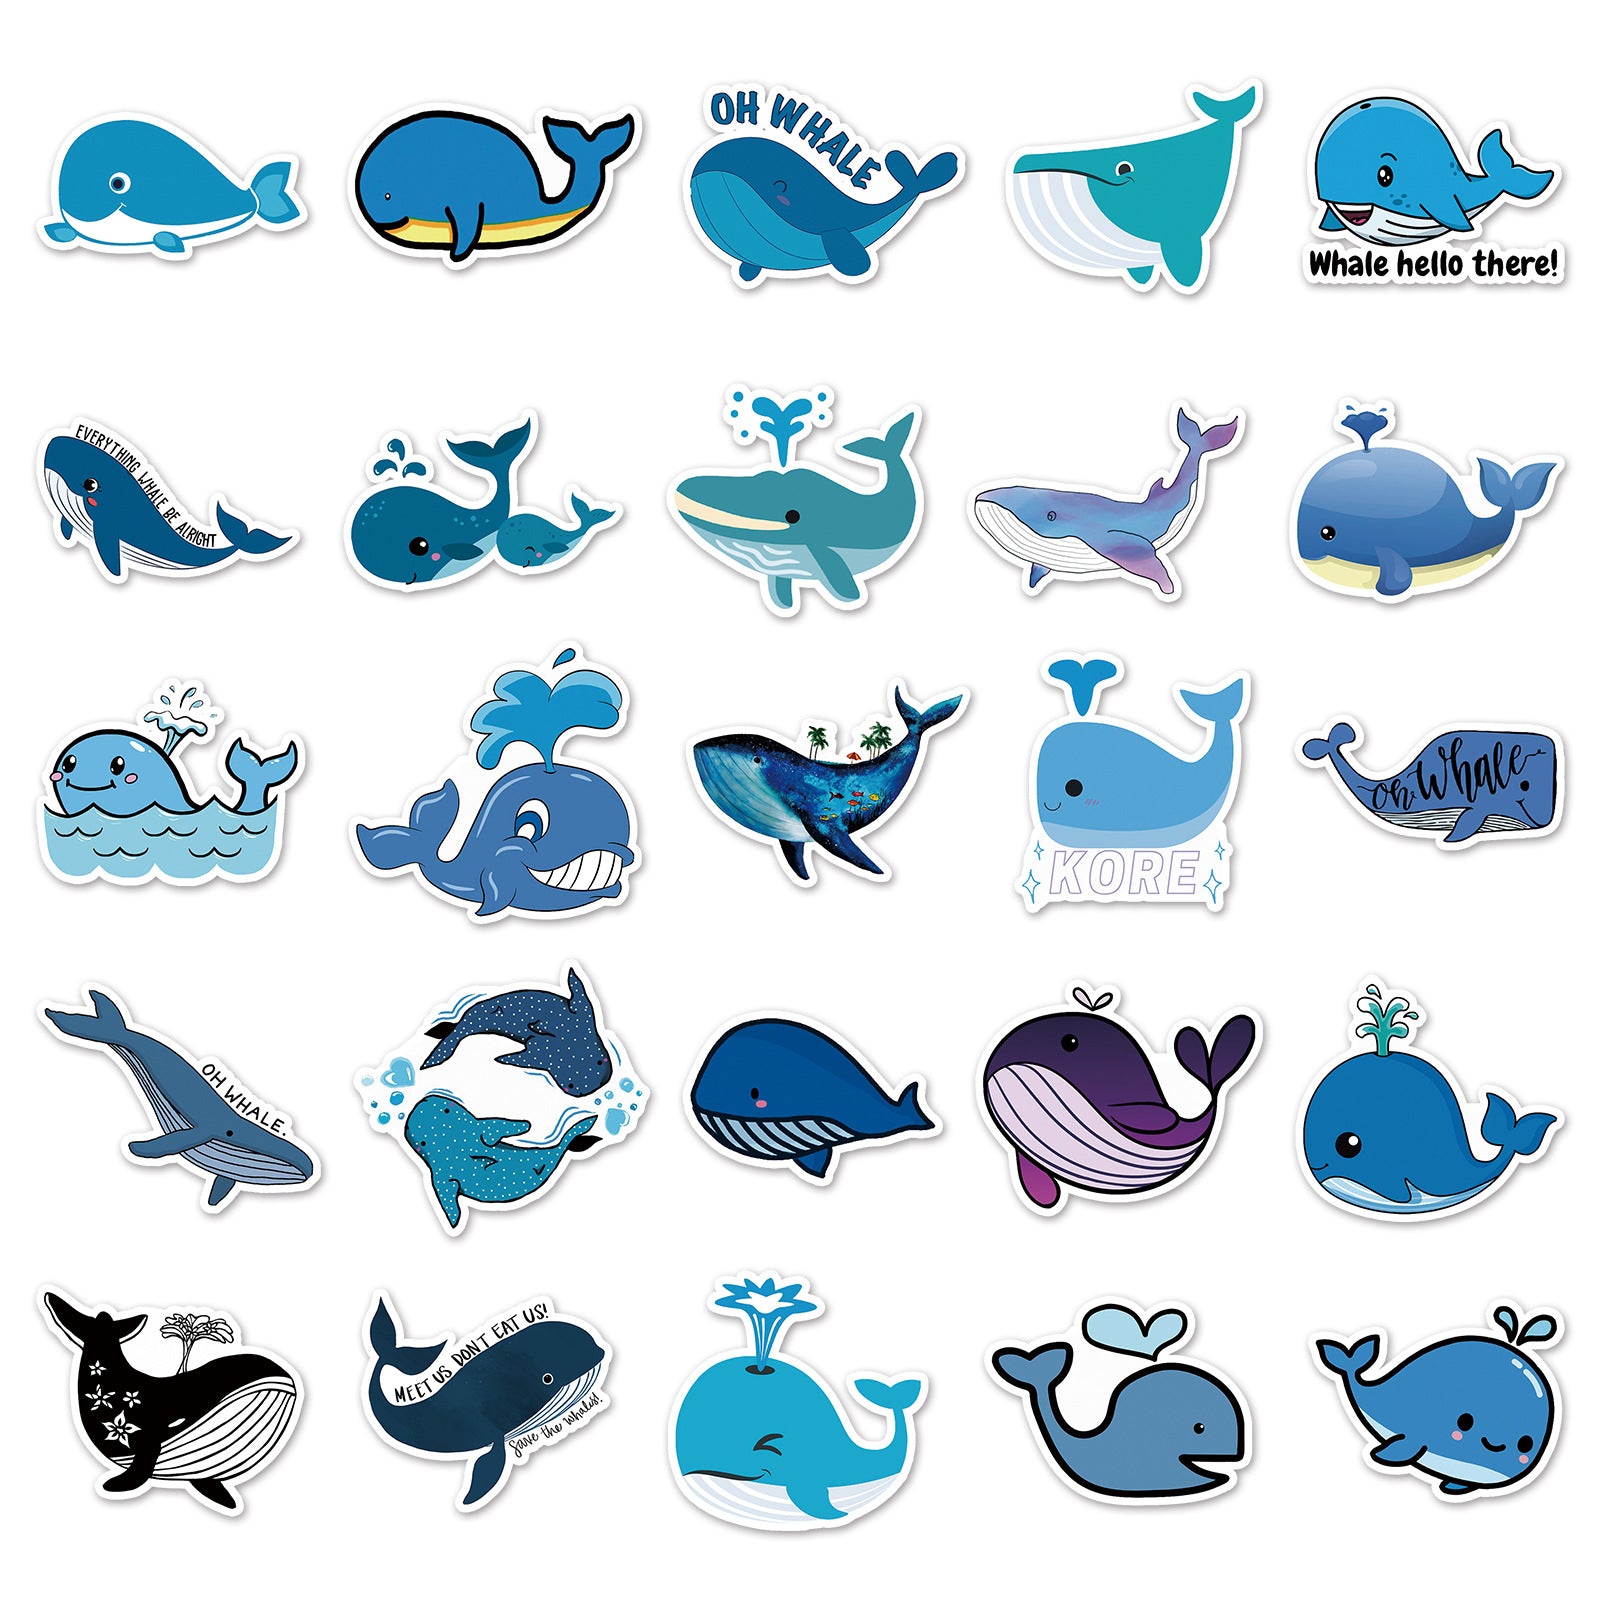 Whales